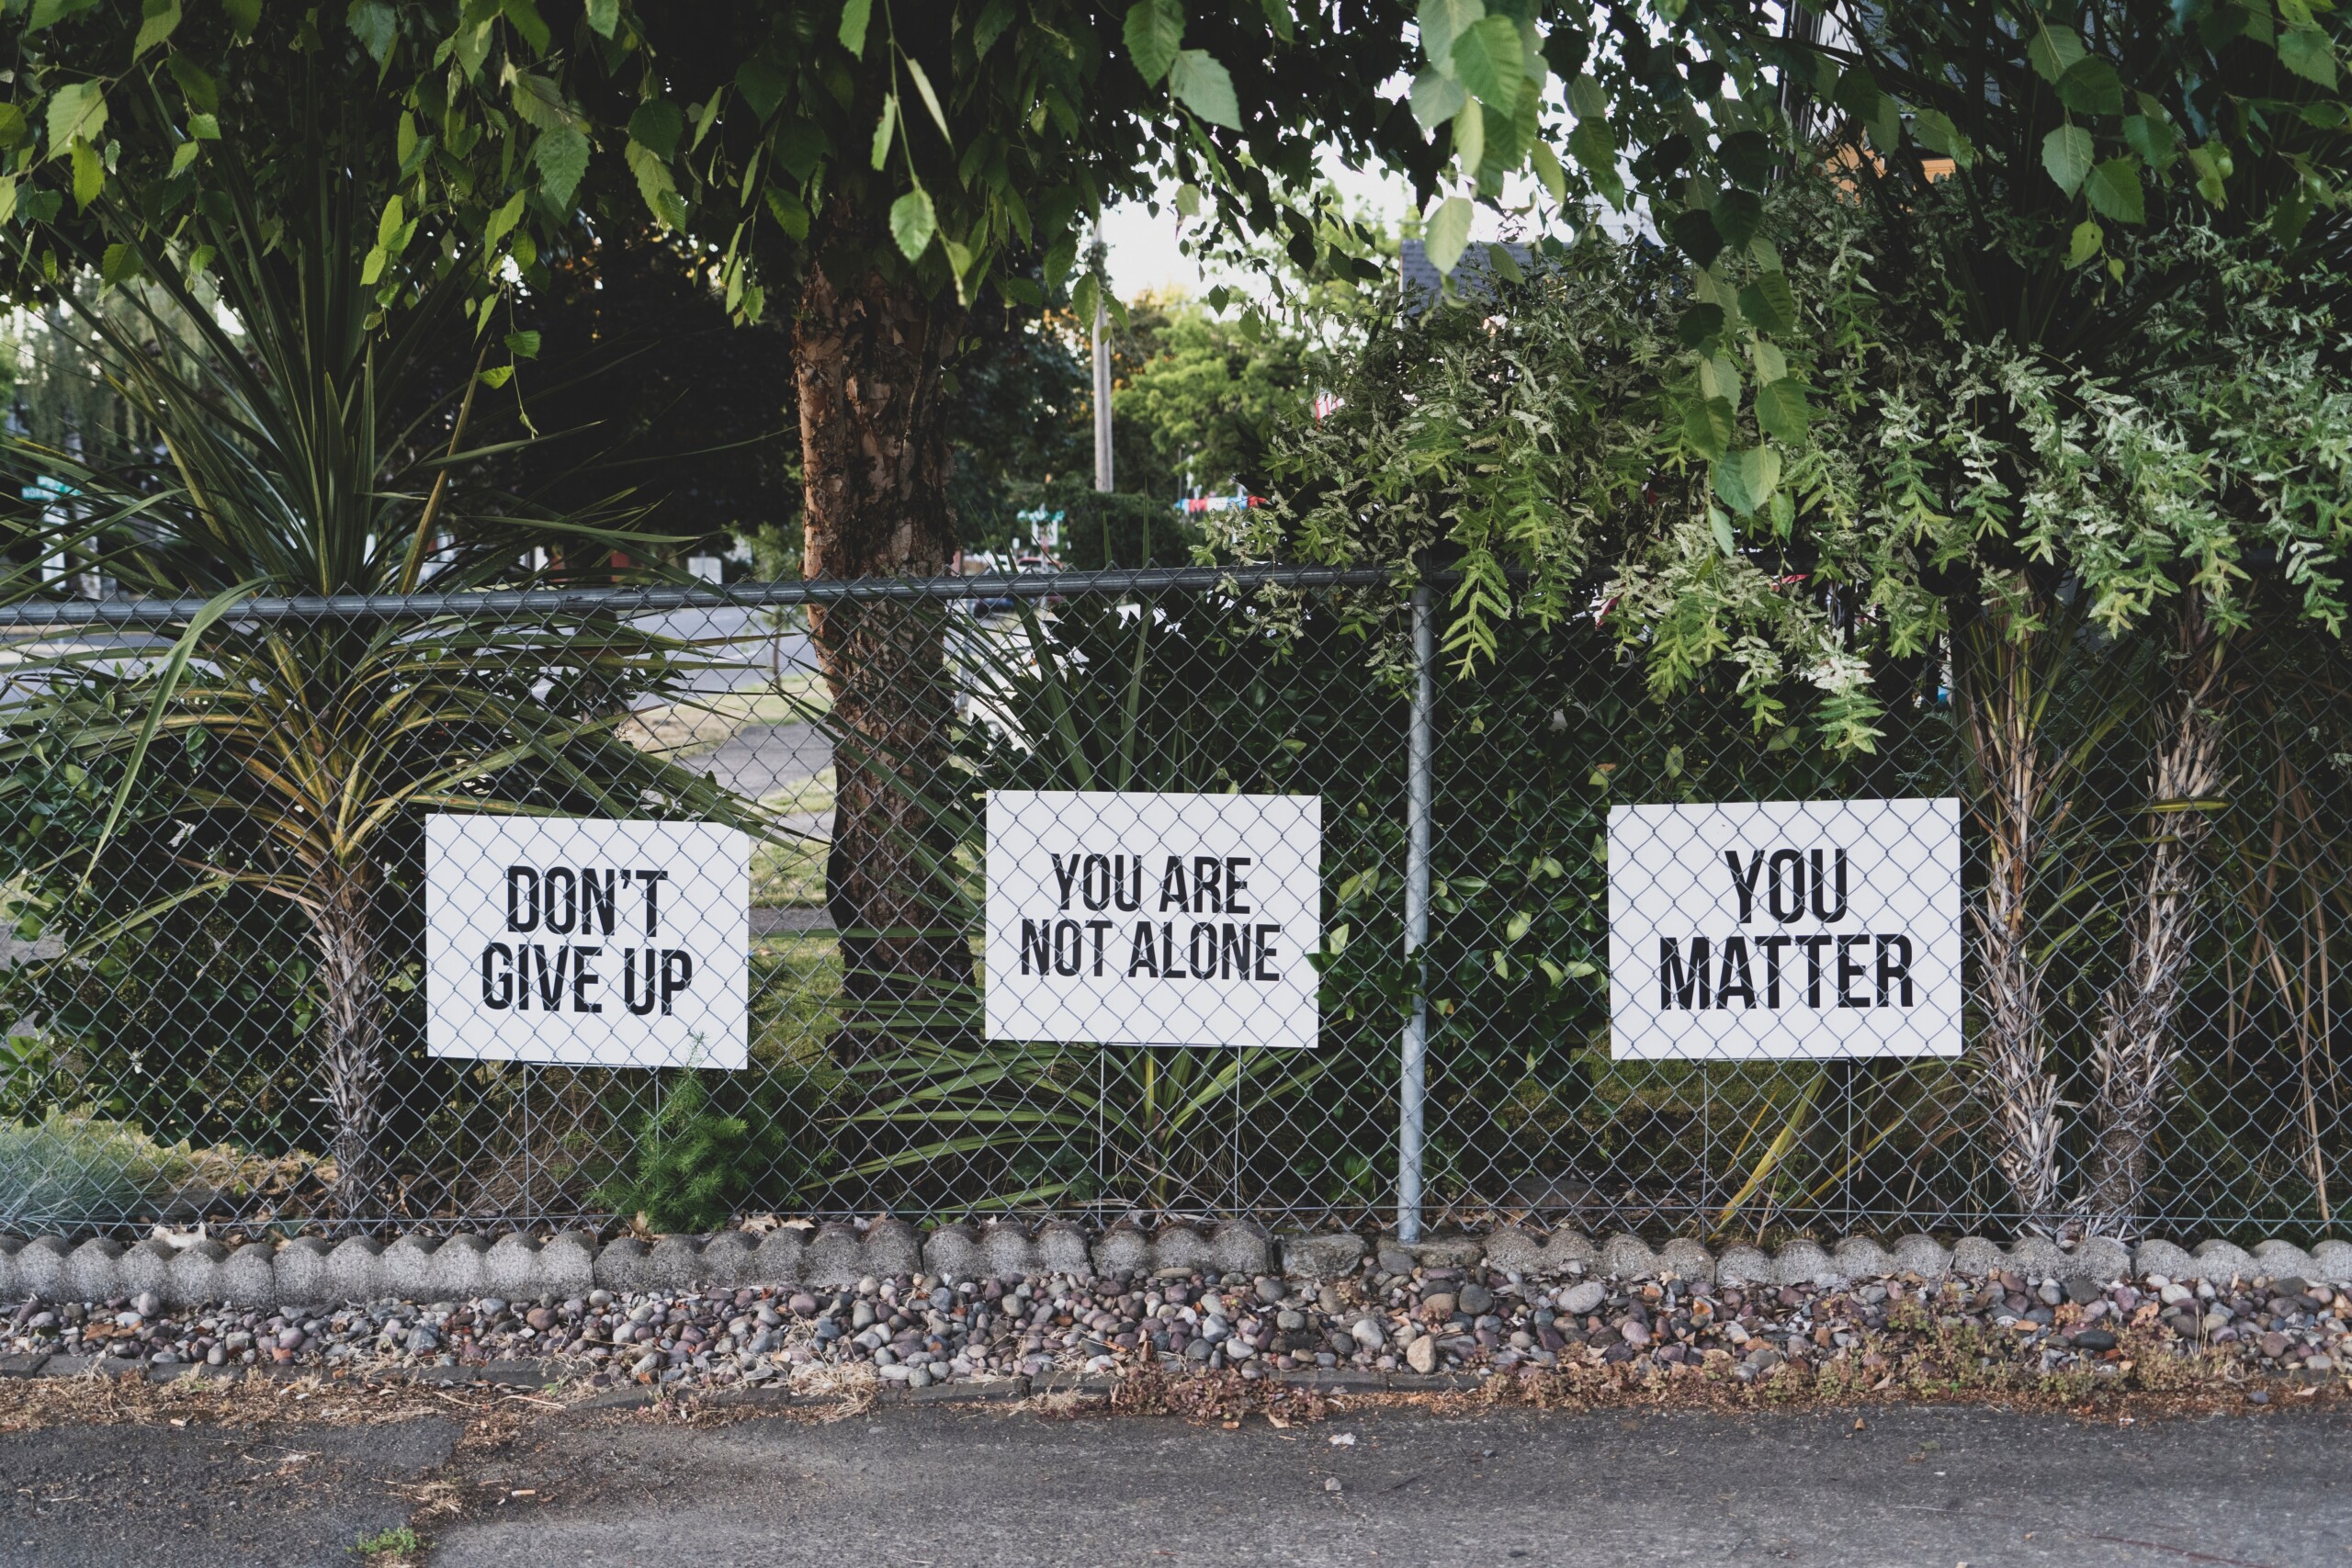 signs on fence reading "You Matter" "Mental Health" and 'Don't Give Up"